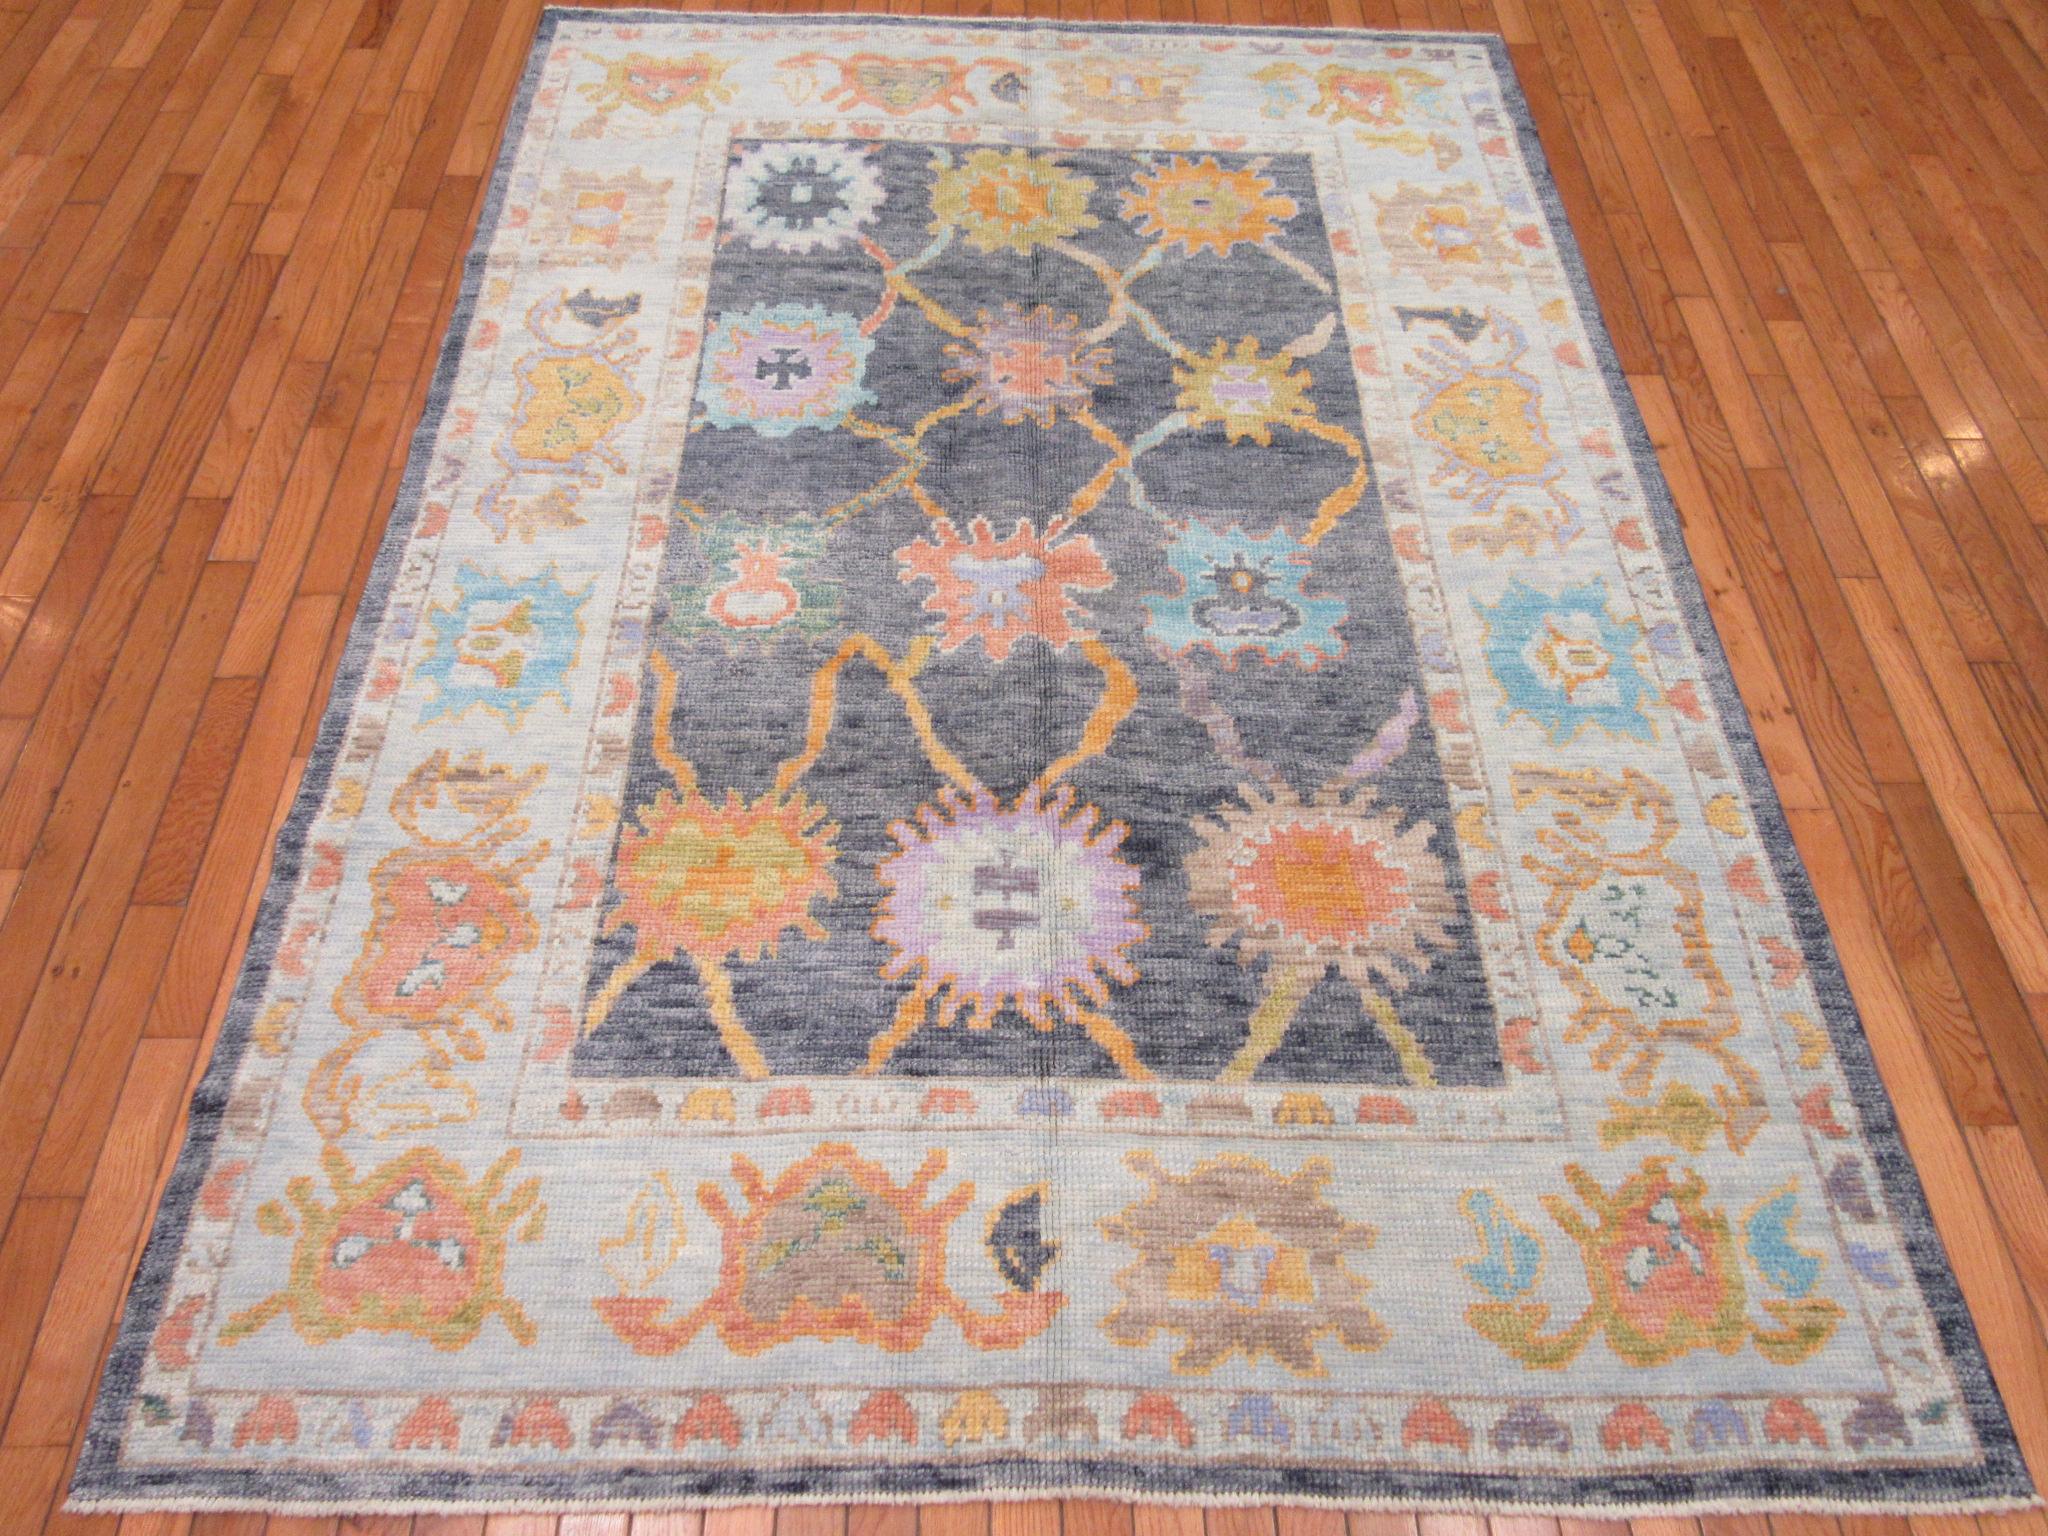 This is a new hand knotted Oushak rug from Turkey. It is made with all wool in rich colors. It has the regular nomadic Oushak weave and a old finish. The rug measures 5' 3